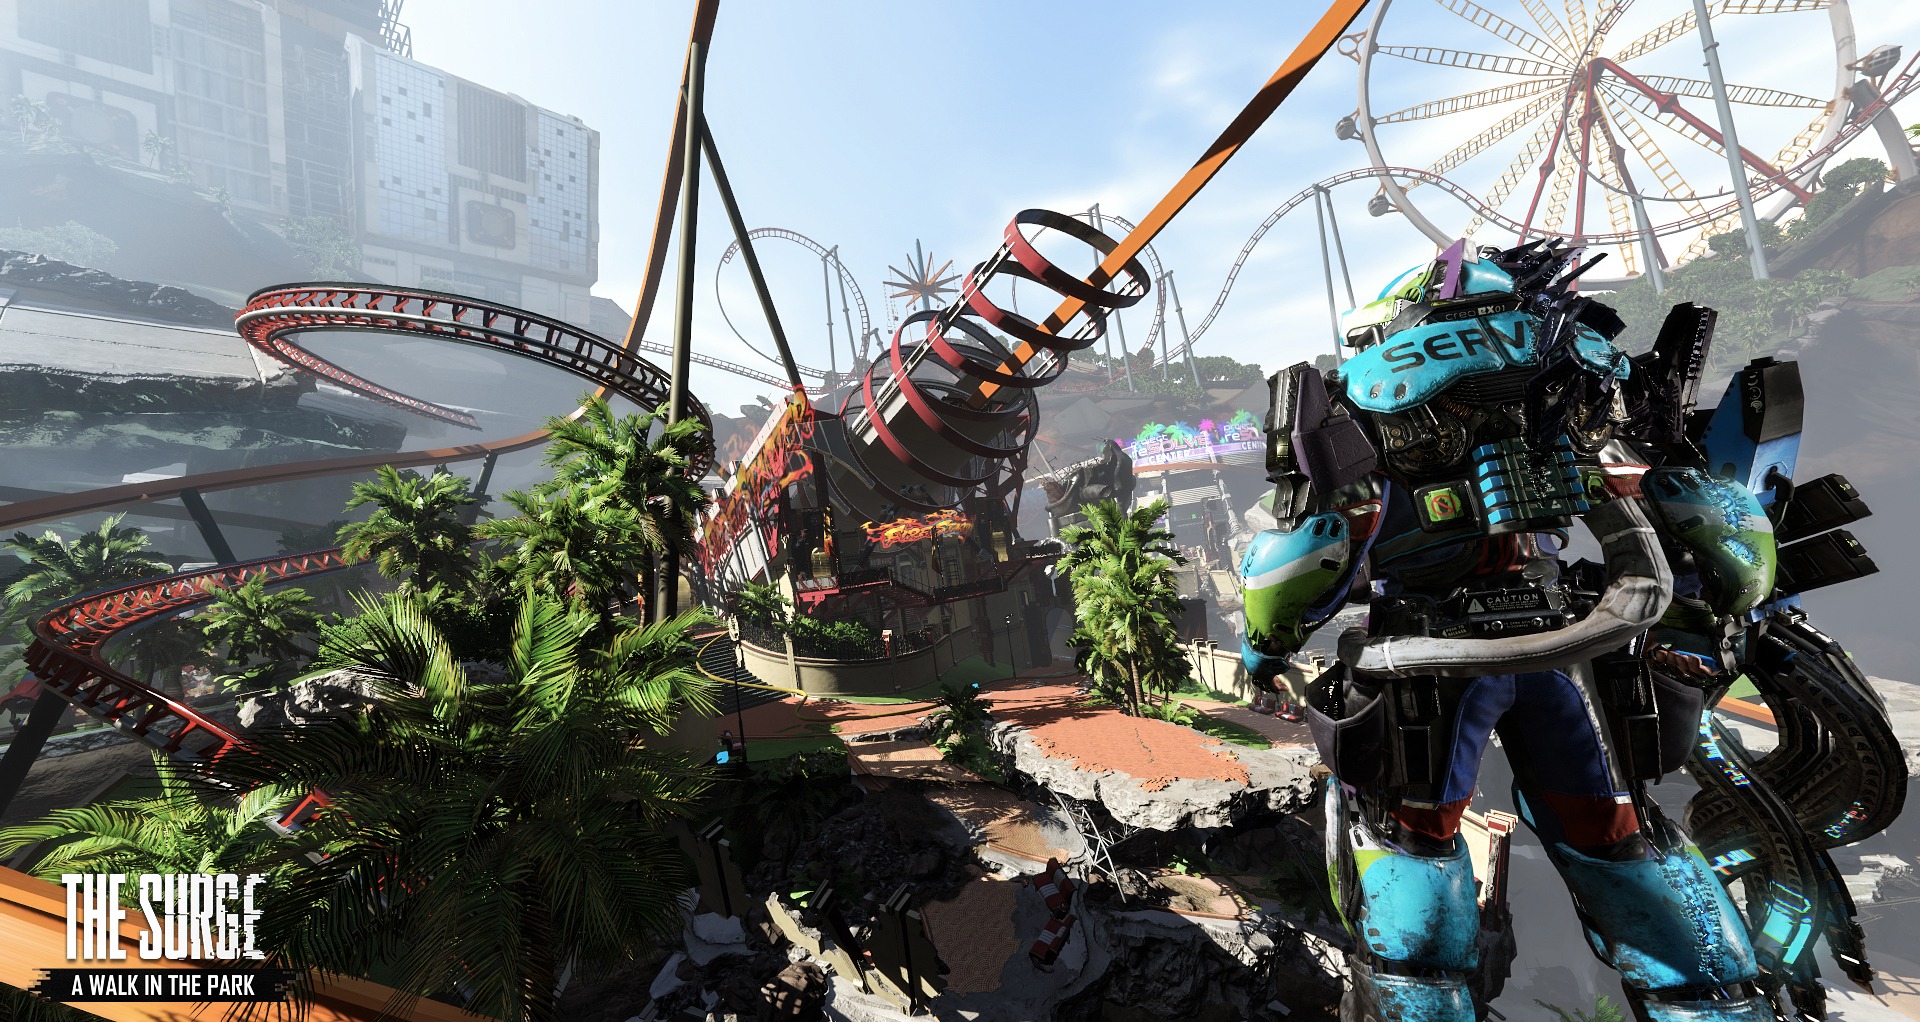 The Surge teases incoming A Walk in The Park DLC, release date set